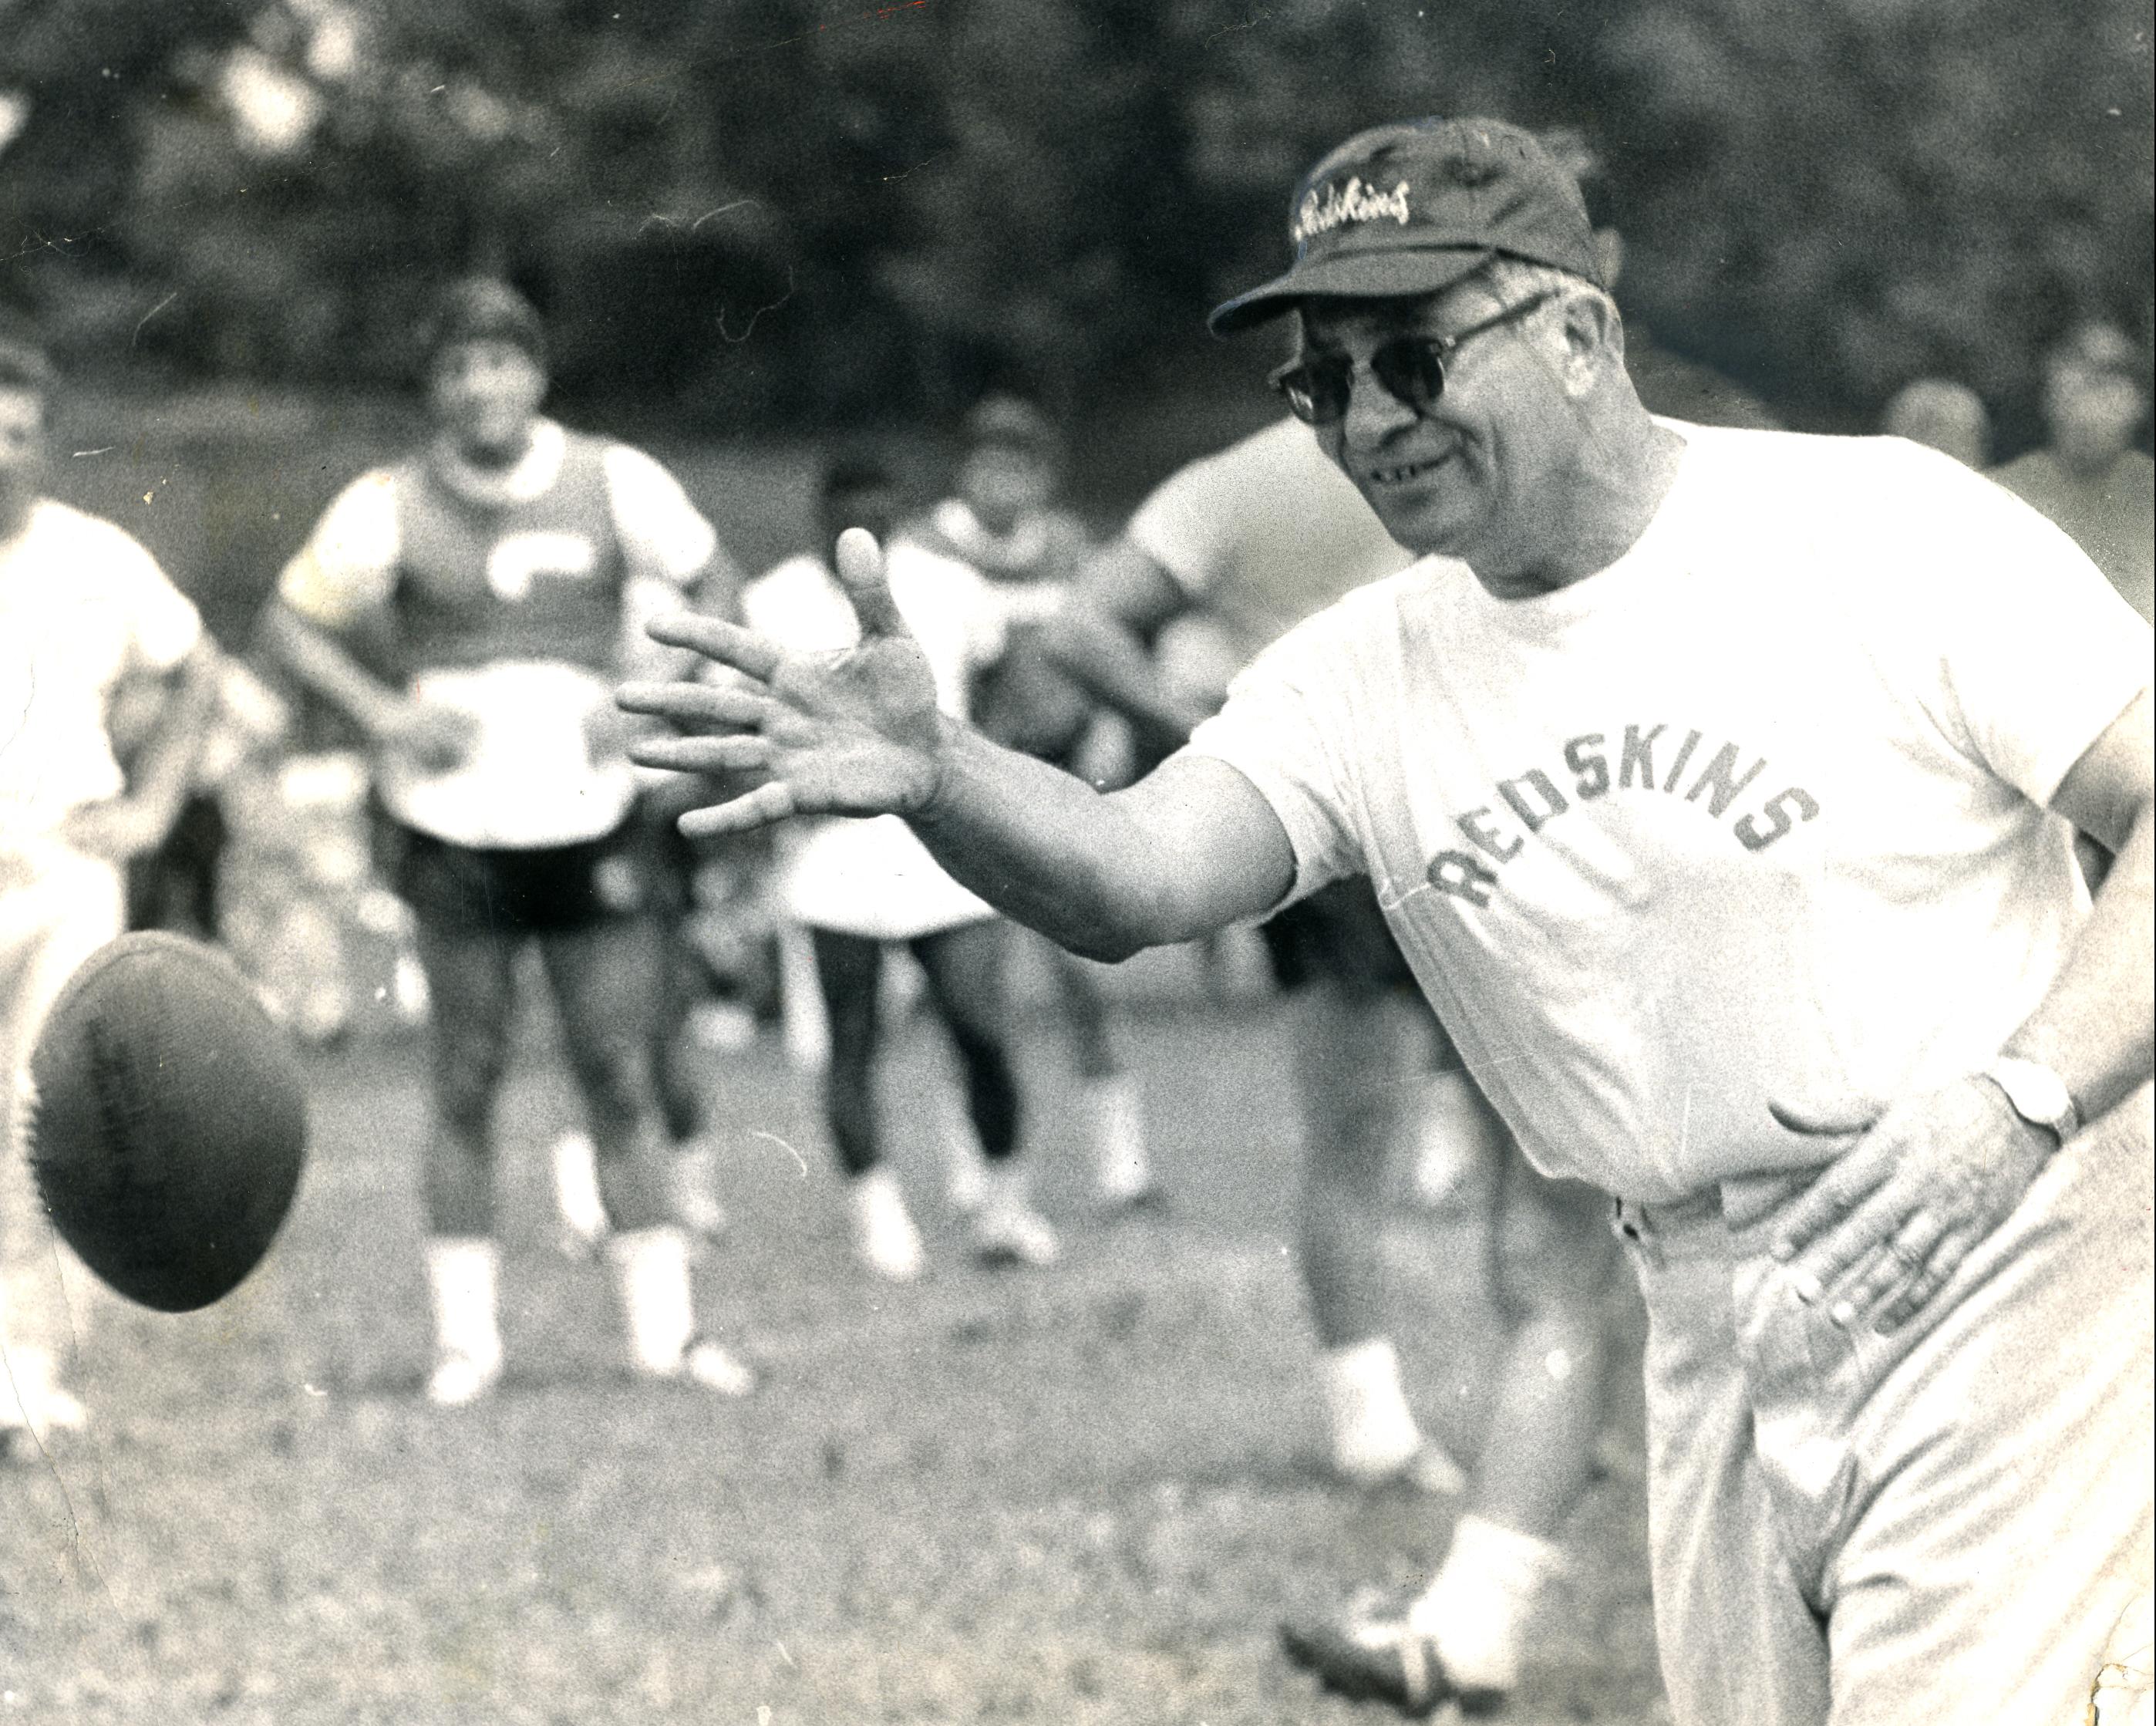 Vince Lombardi tosses a football in a practice during the 1969 season. (Reprinted with permission of the DC Public Library, Star Collection, © Washington Post.)